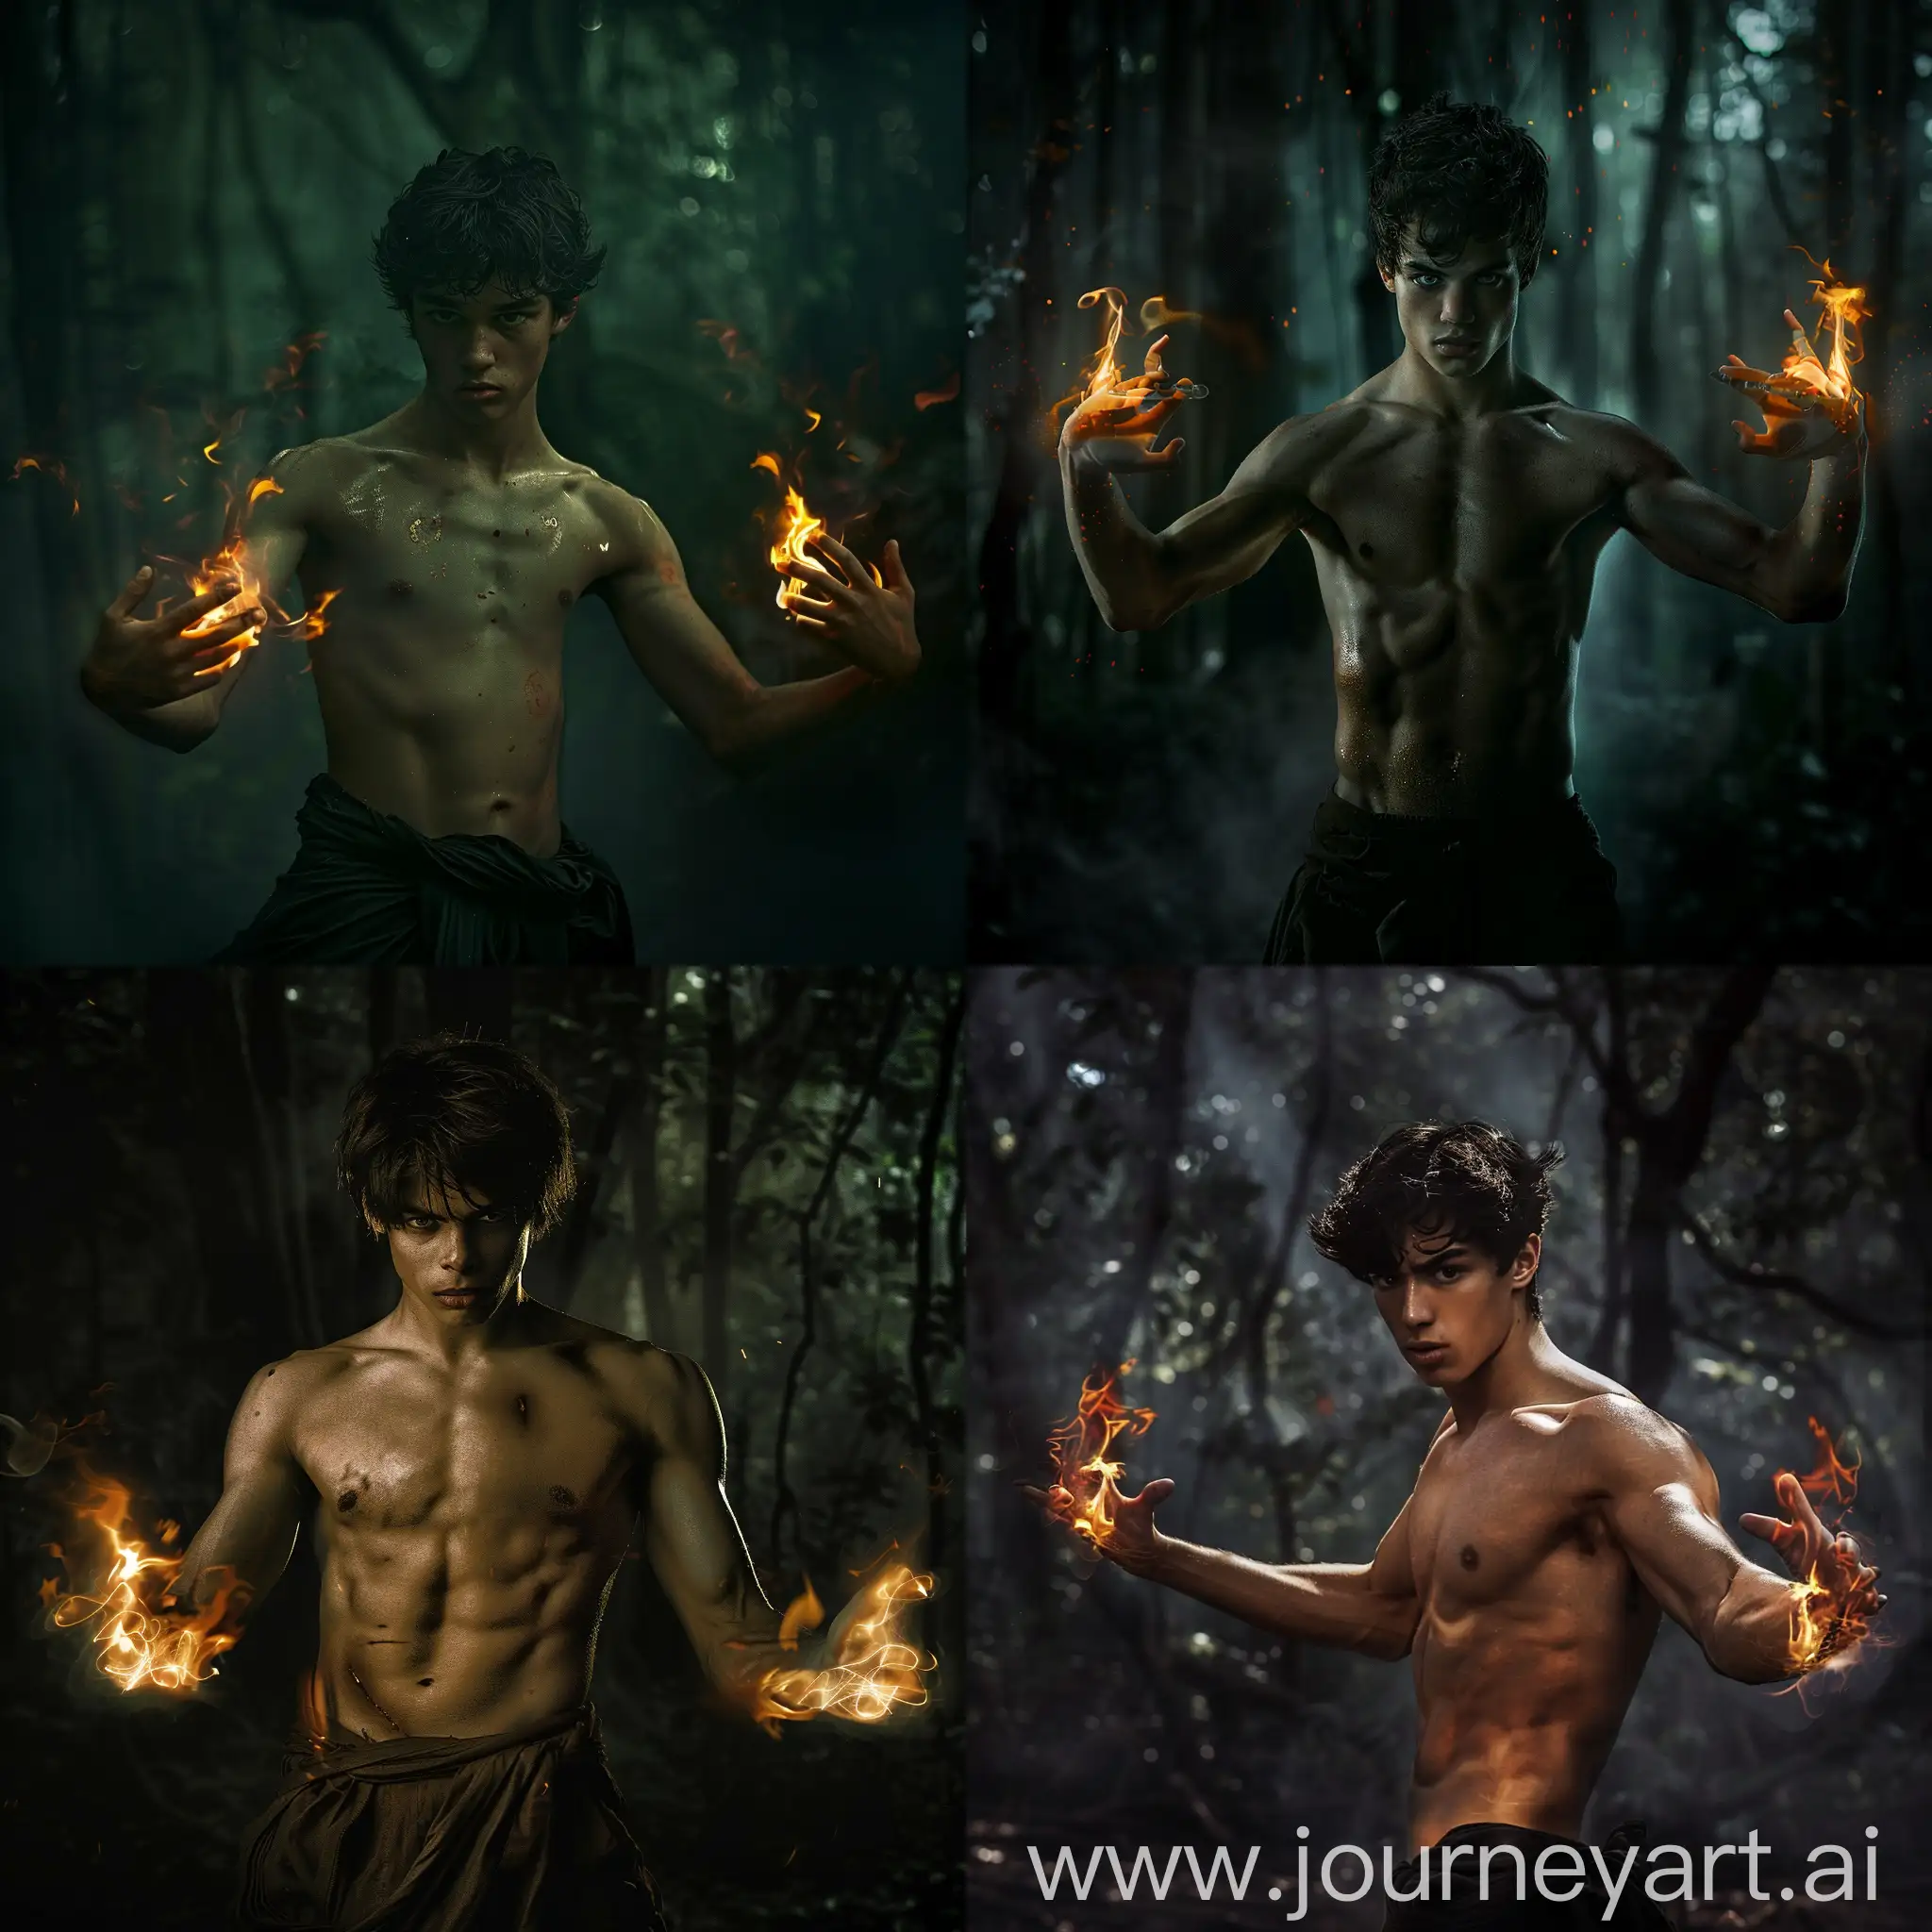 DarkHaired-Shirtless-Man-with-Fiery-Palms-Stands-Defensively-in-Forest